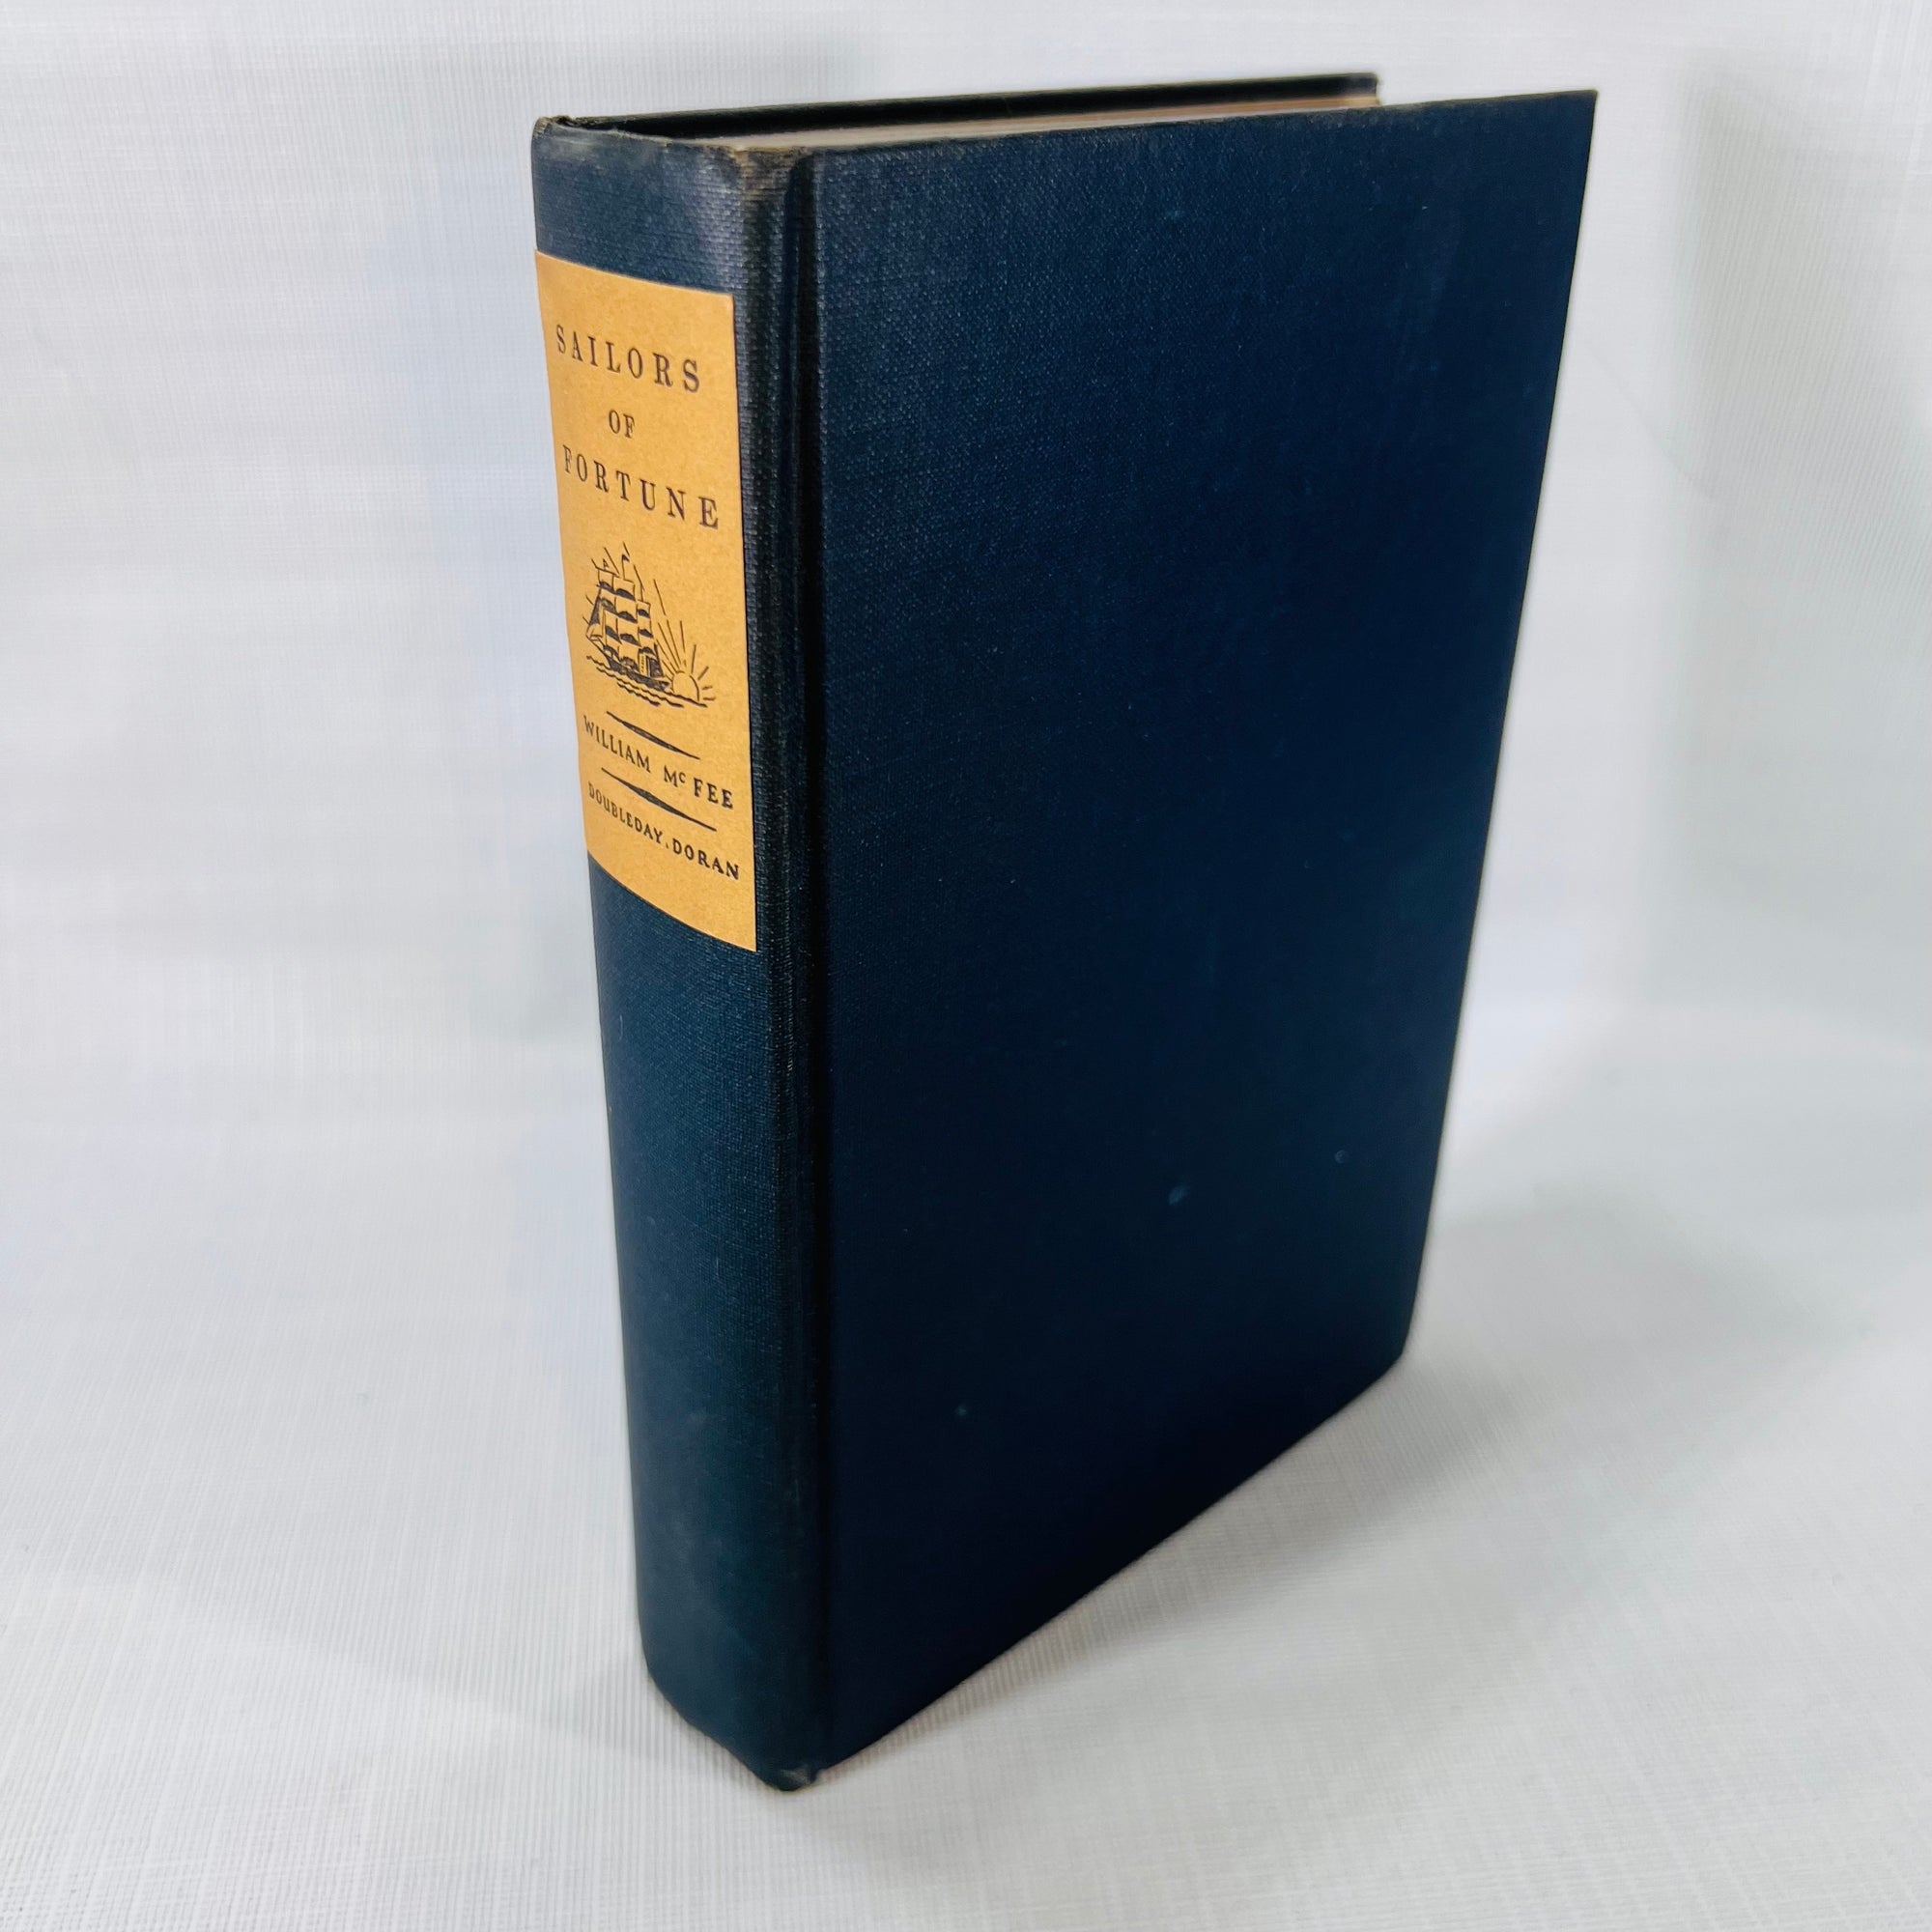 Sailors of Fortune by William McFee 1926 Doubleday Doran & Co